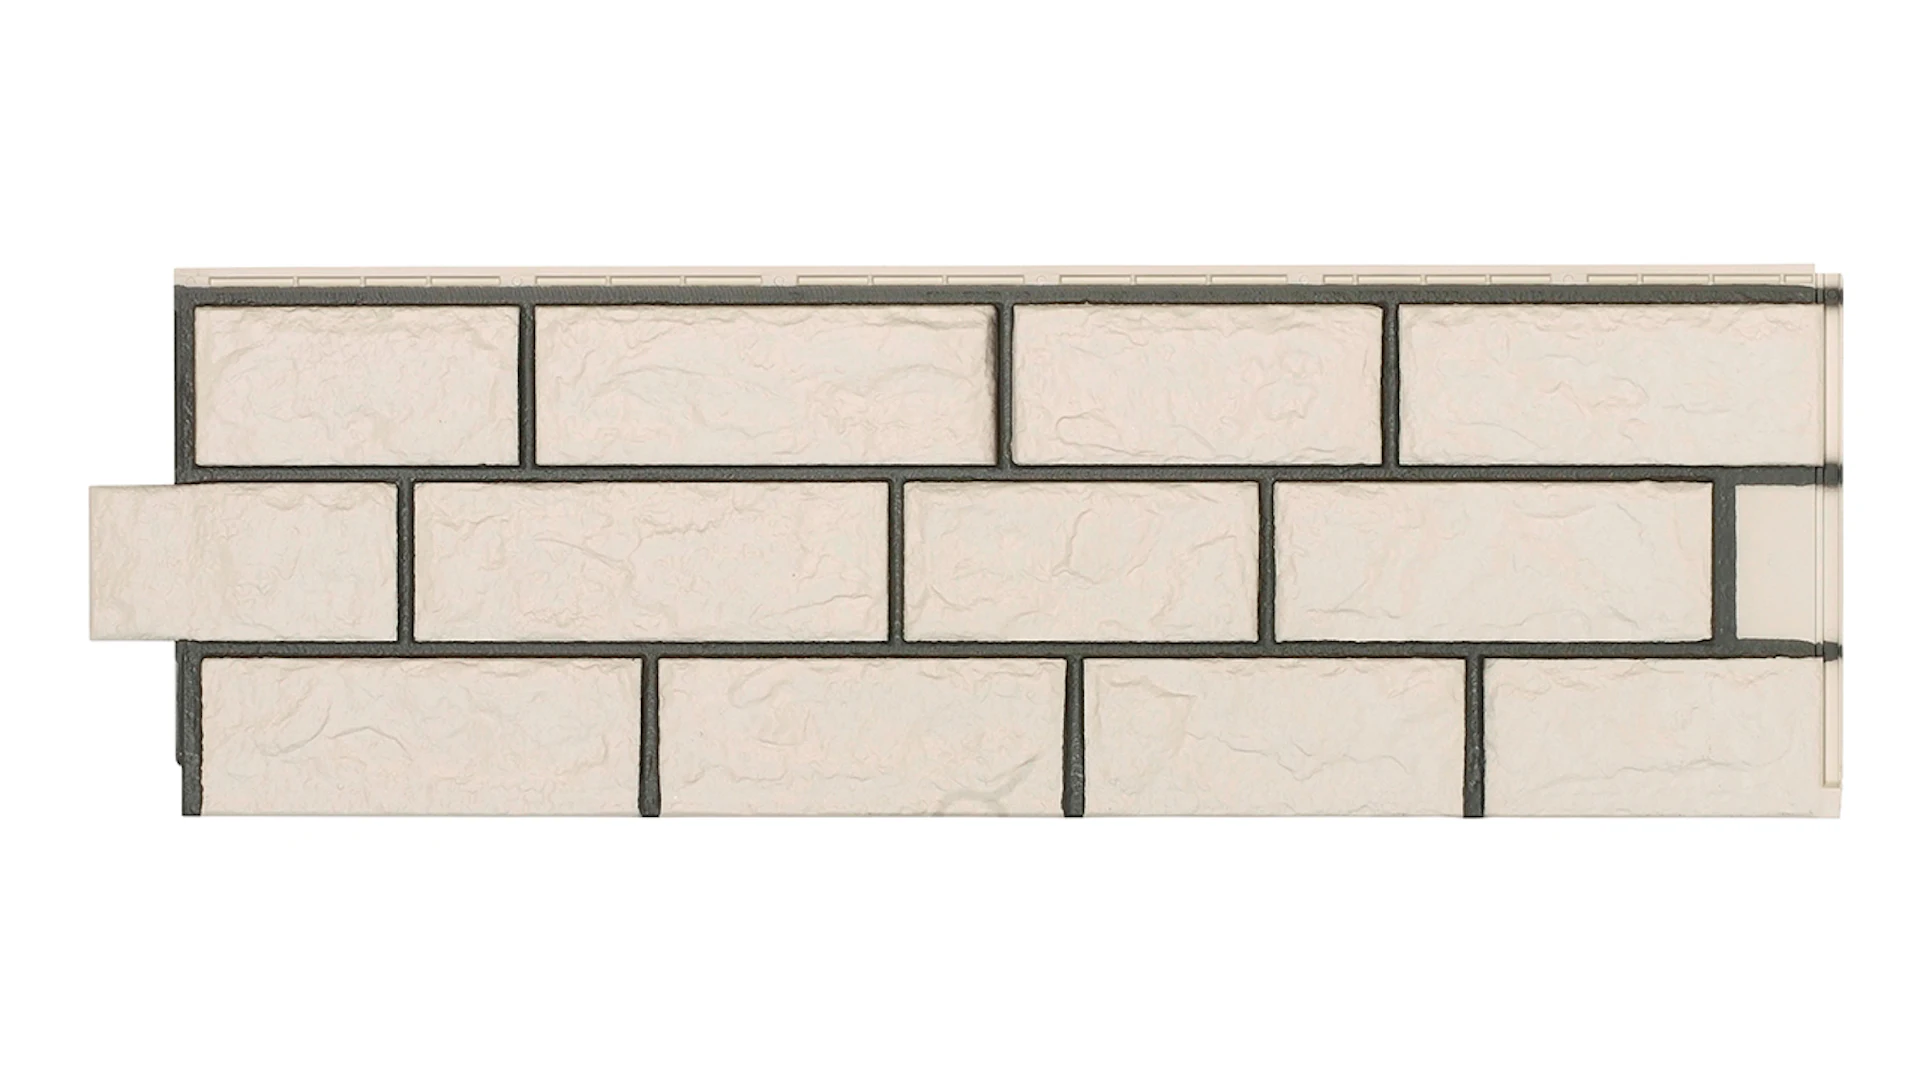 Zierer facade cladding clinker facing brick in quarry stone look BS1 - 1140 x 359 mm white made of GRP